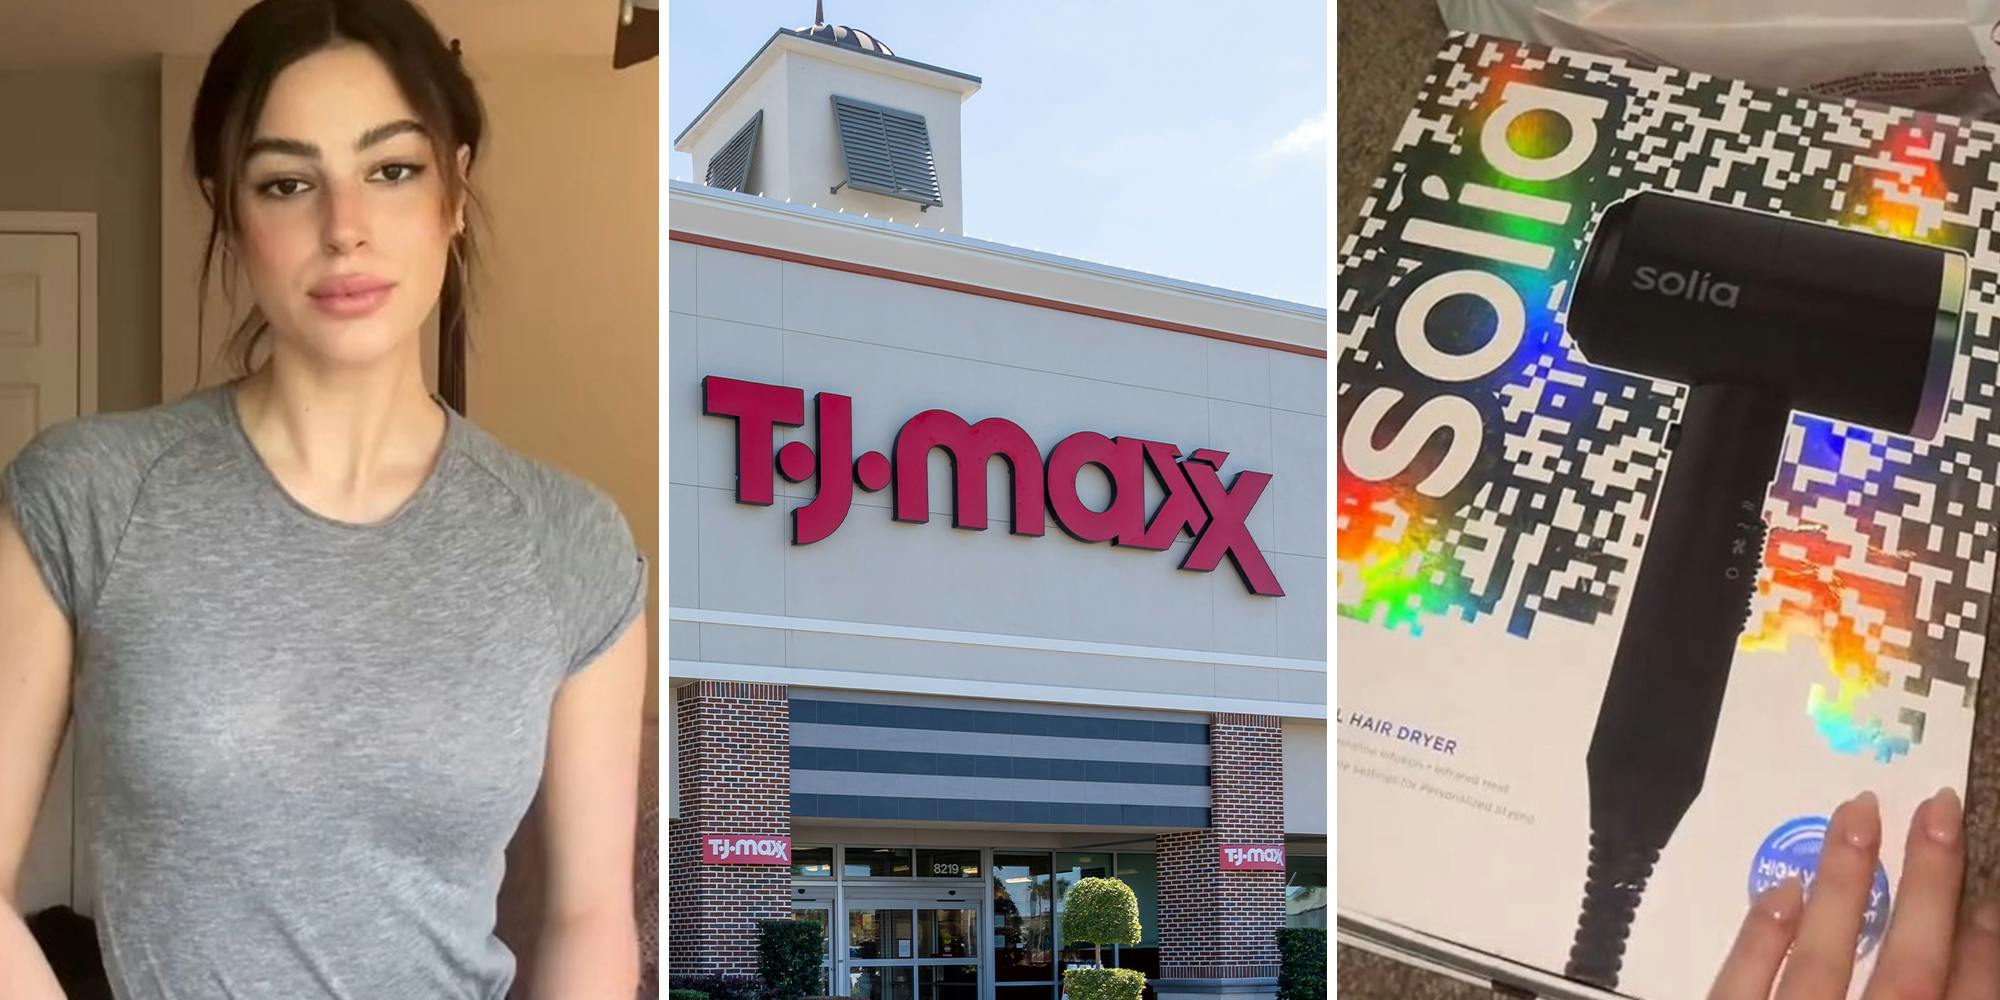 ‘This is disgusting’: Shopper warns against shopping at T.J. Maxx after buying hair dryer